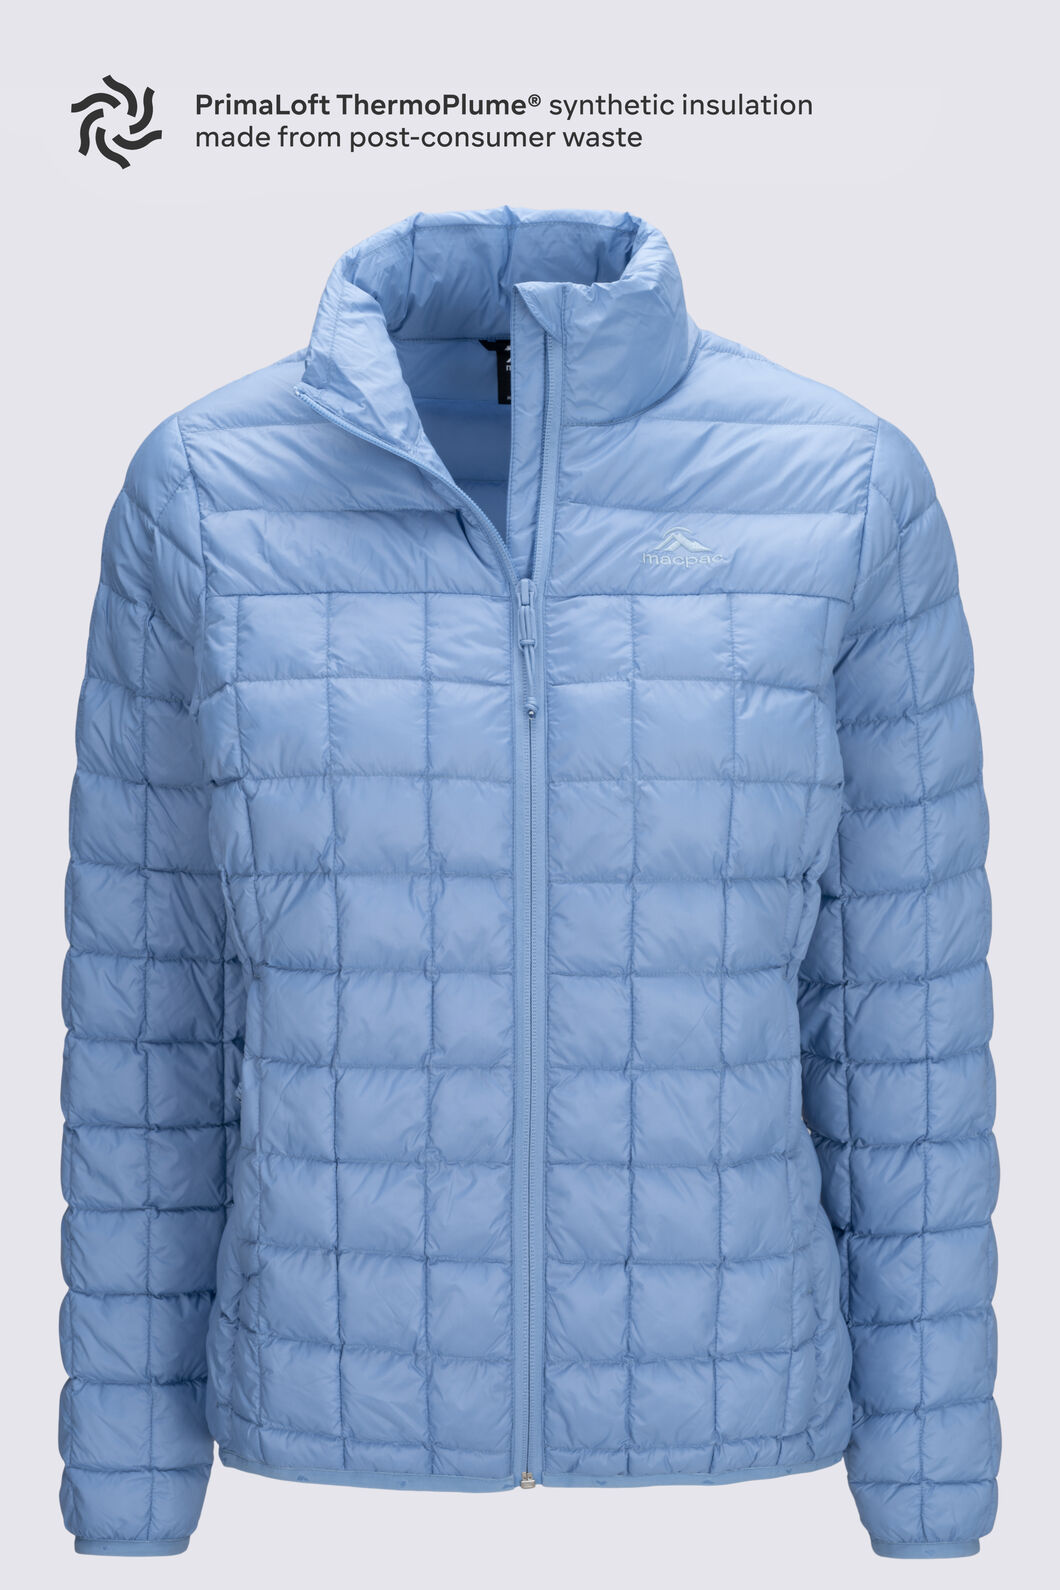 KUHL The One Hoody - Women's  Synthetic-Filled Jackets